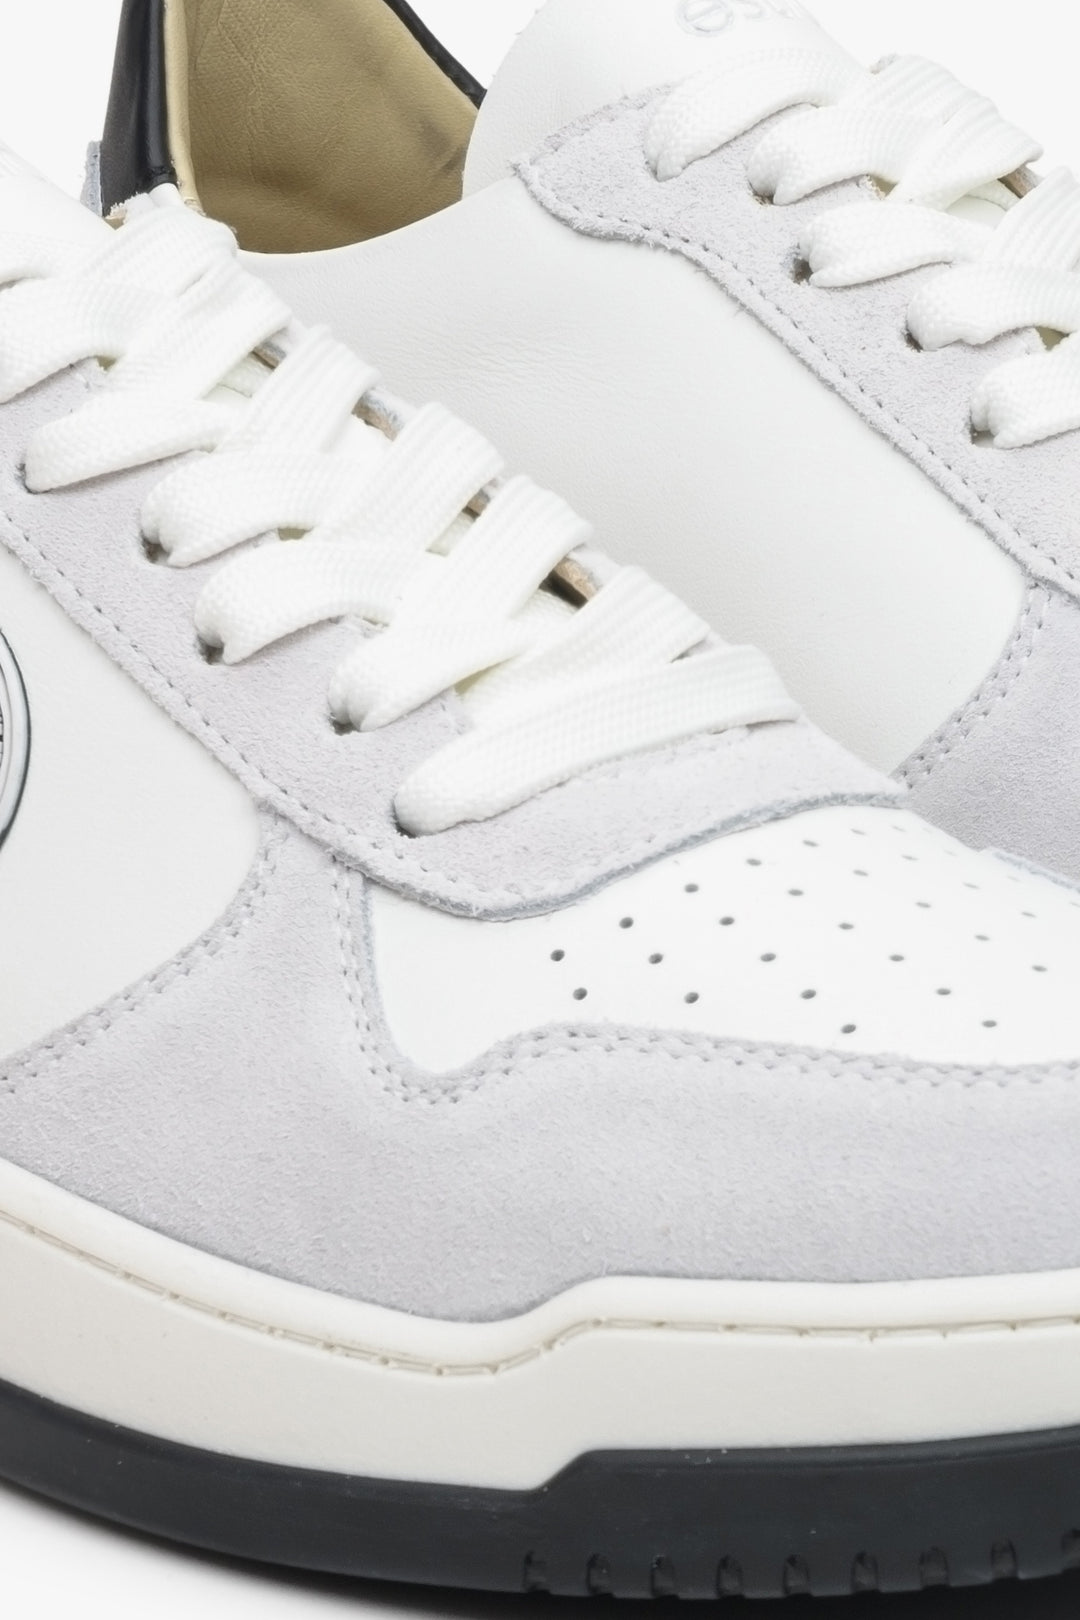 Leather women's sneakers by Estro in grey and white color with laces - close-up on the details.